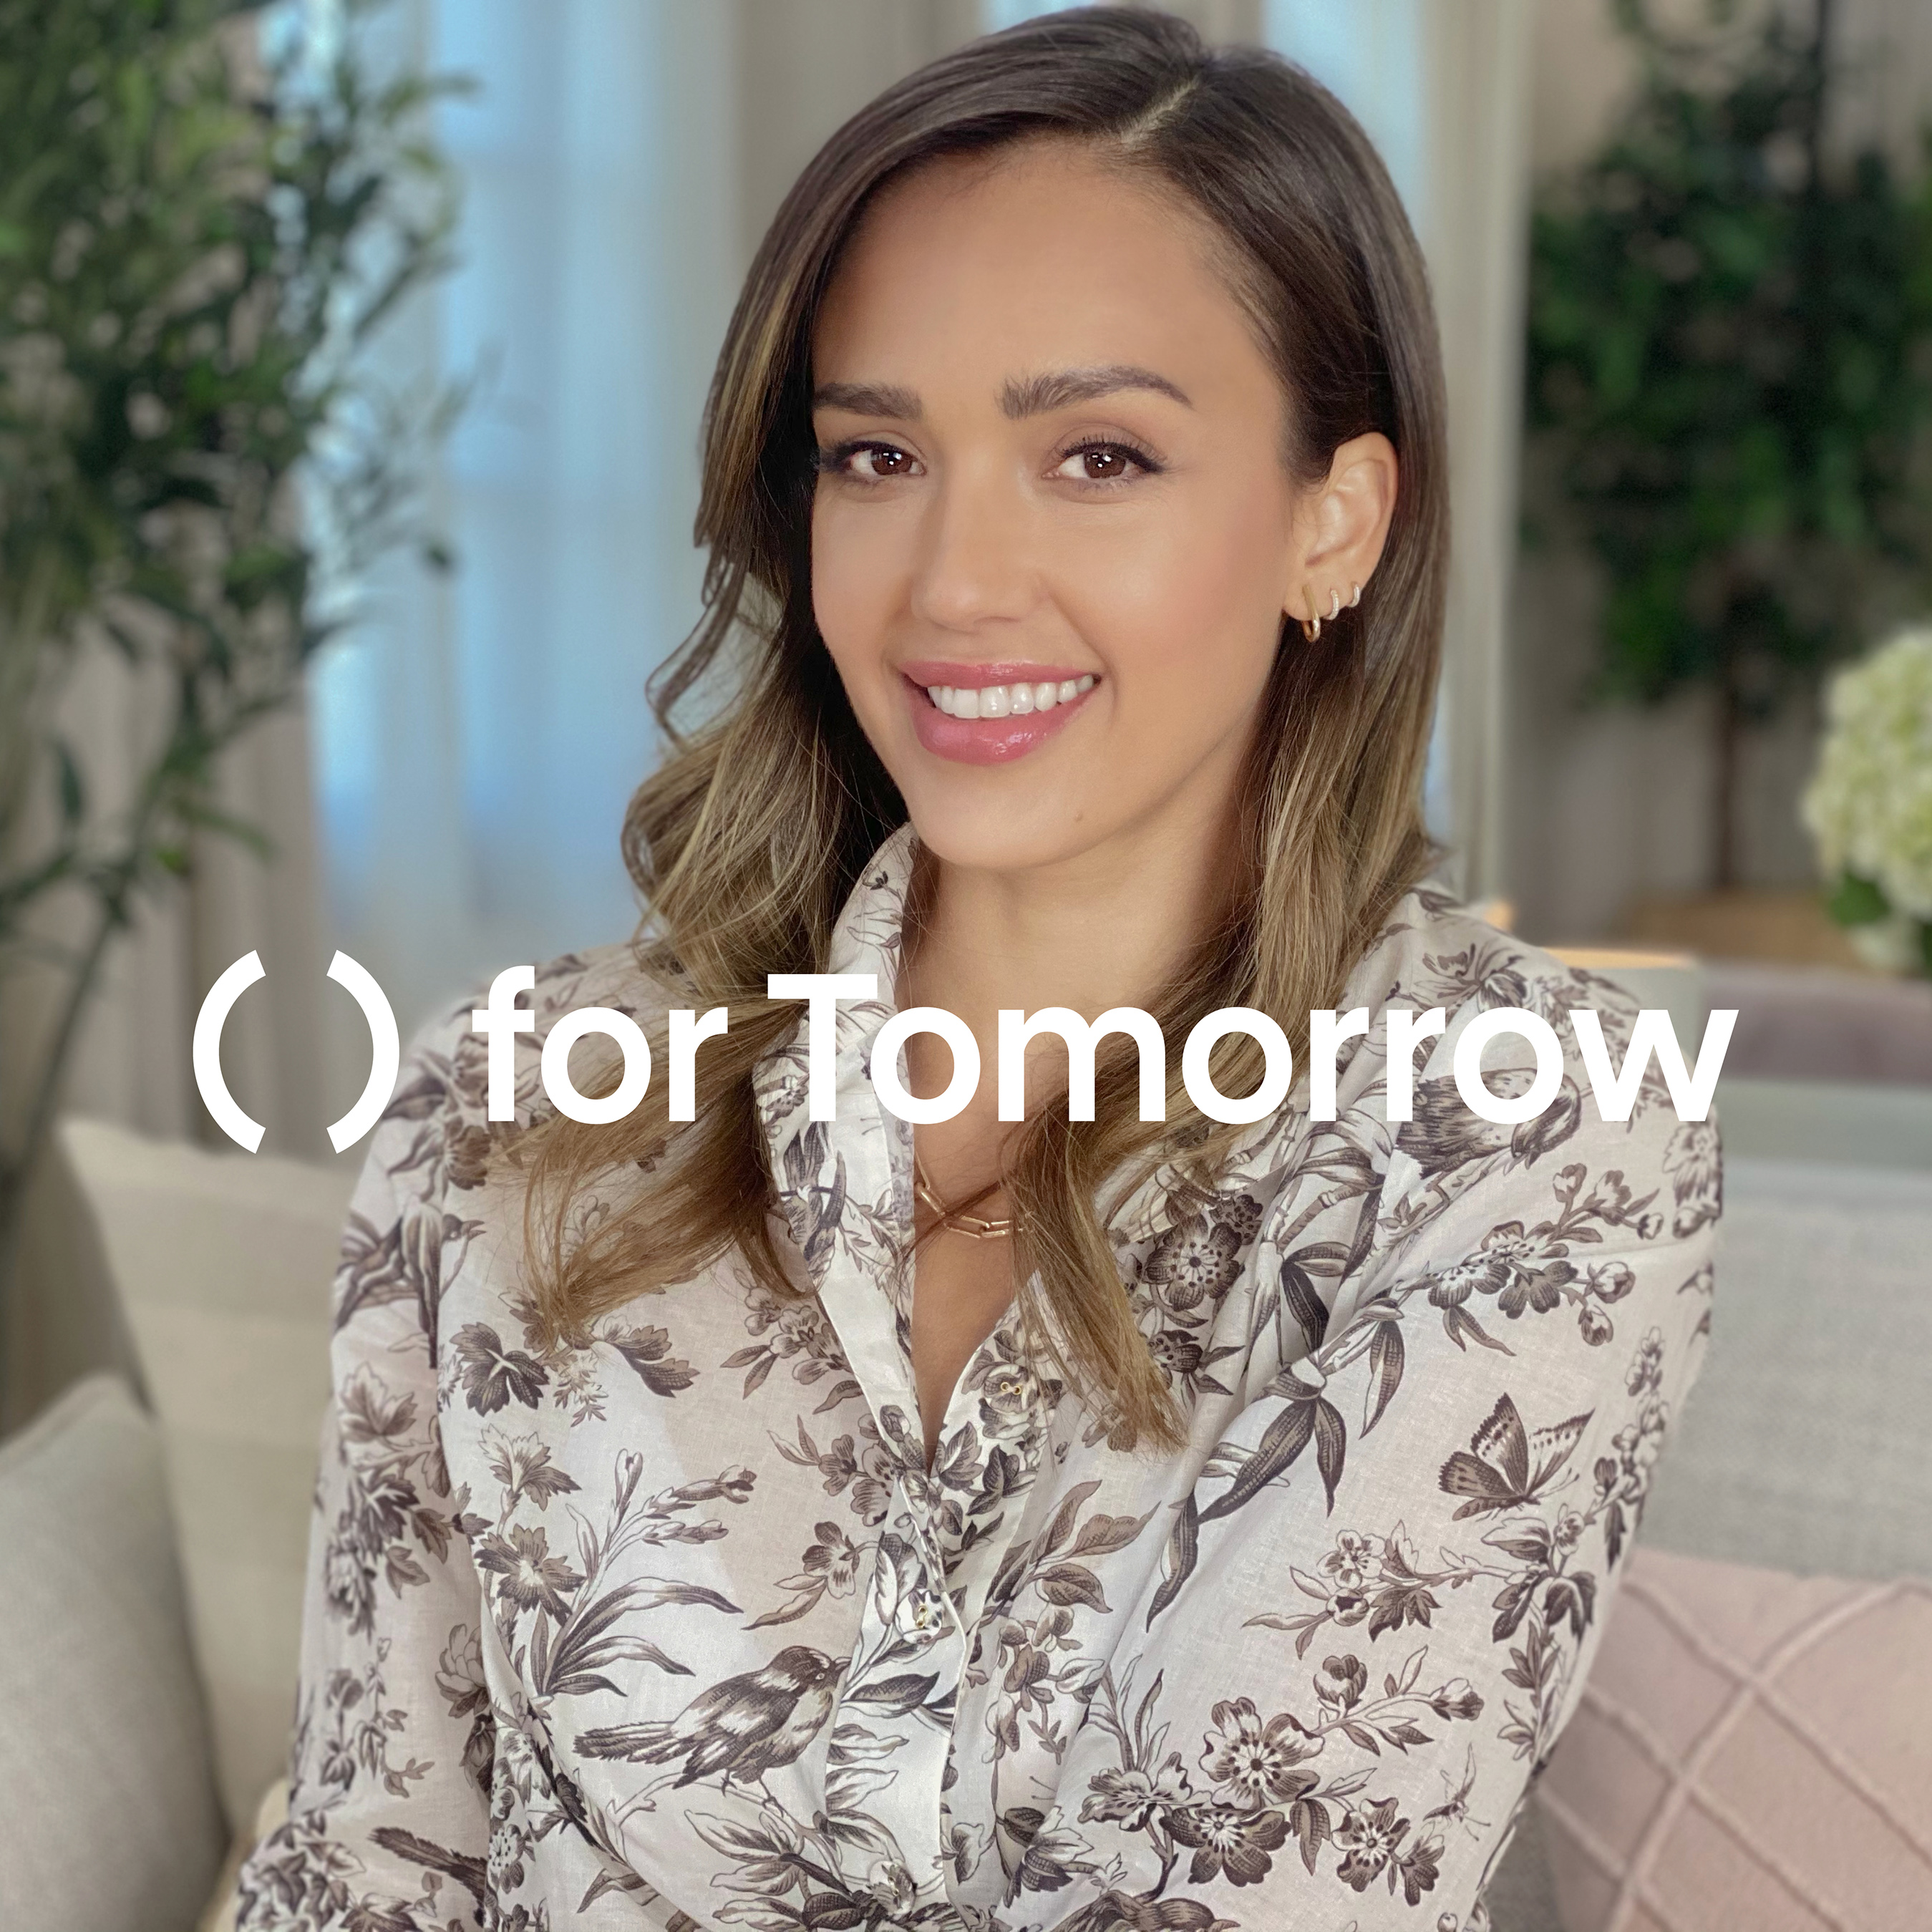 Hyundai Motor and UNDP Accelerator Labs jointly released a video featuring sustainable solutions submitted to the ‘for Tomorrow’ project, narrated by project ambassador Jessica Alba.